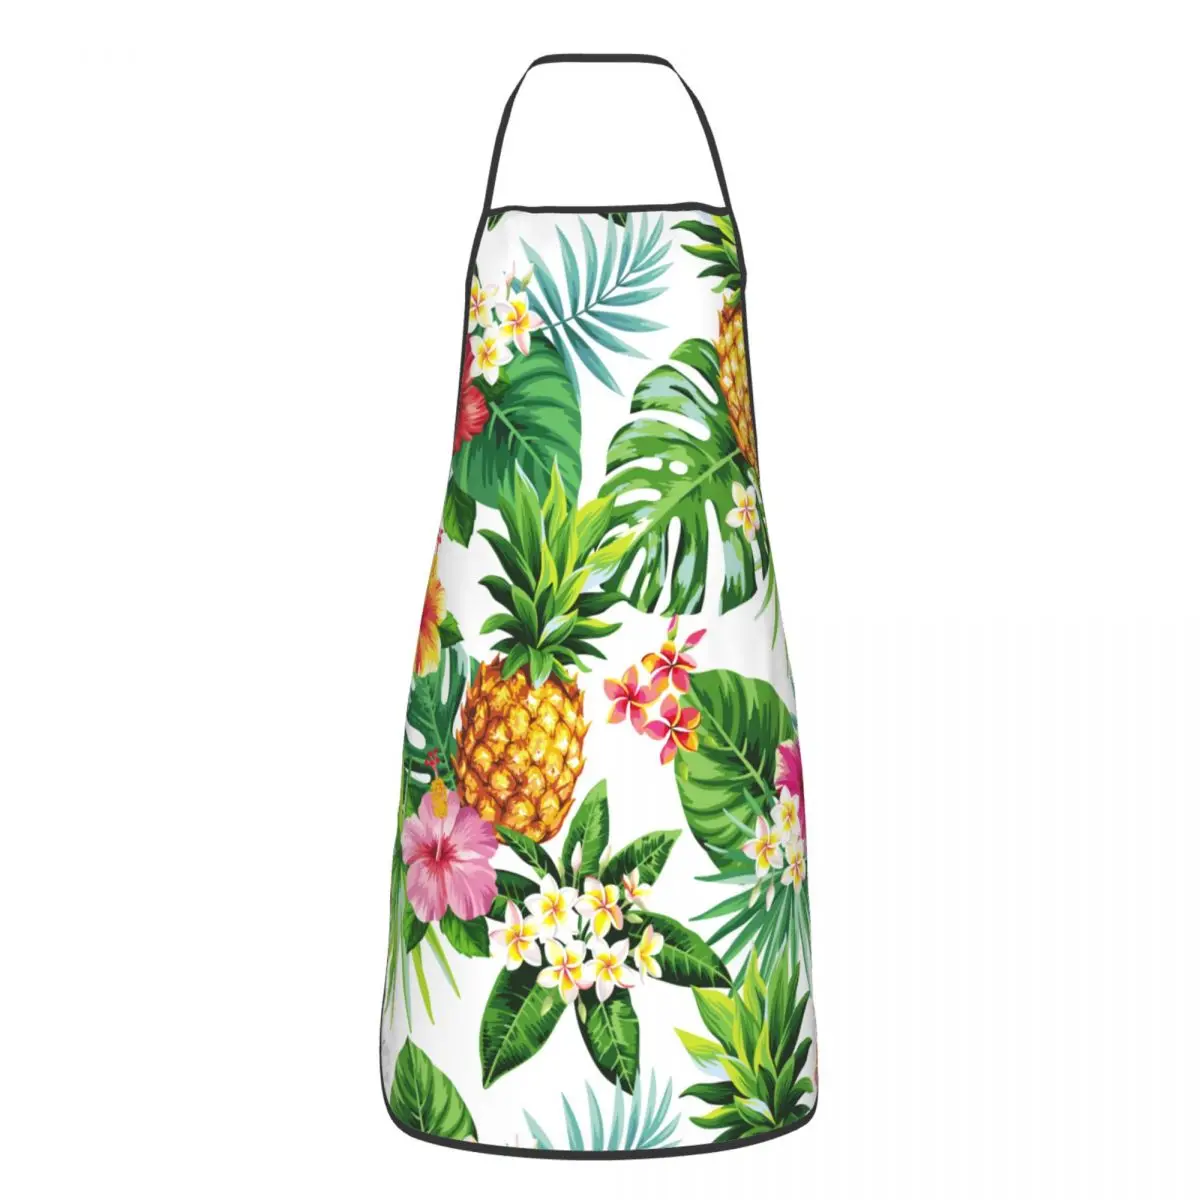 

Summer Tropical Palm Leaves Apron Household Cleaning Gardening Pineapple Bibs Kitchen Waterproof Pinafore for Men Women